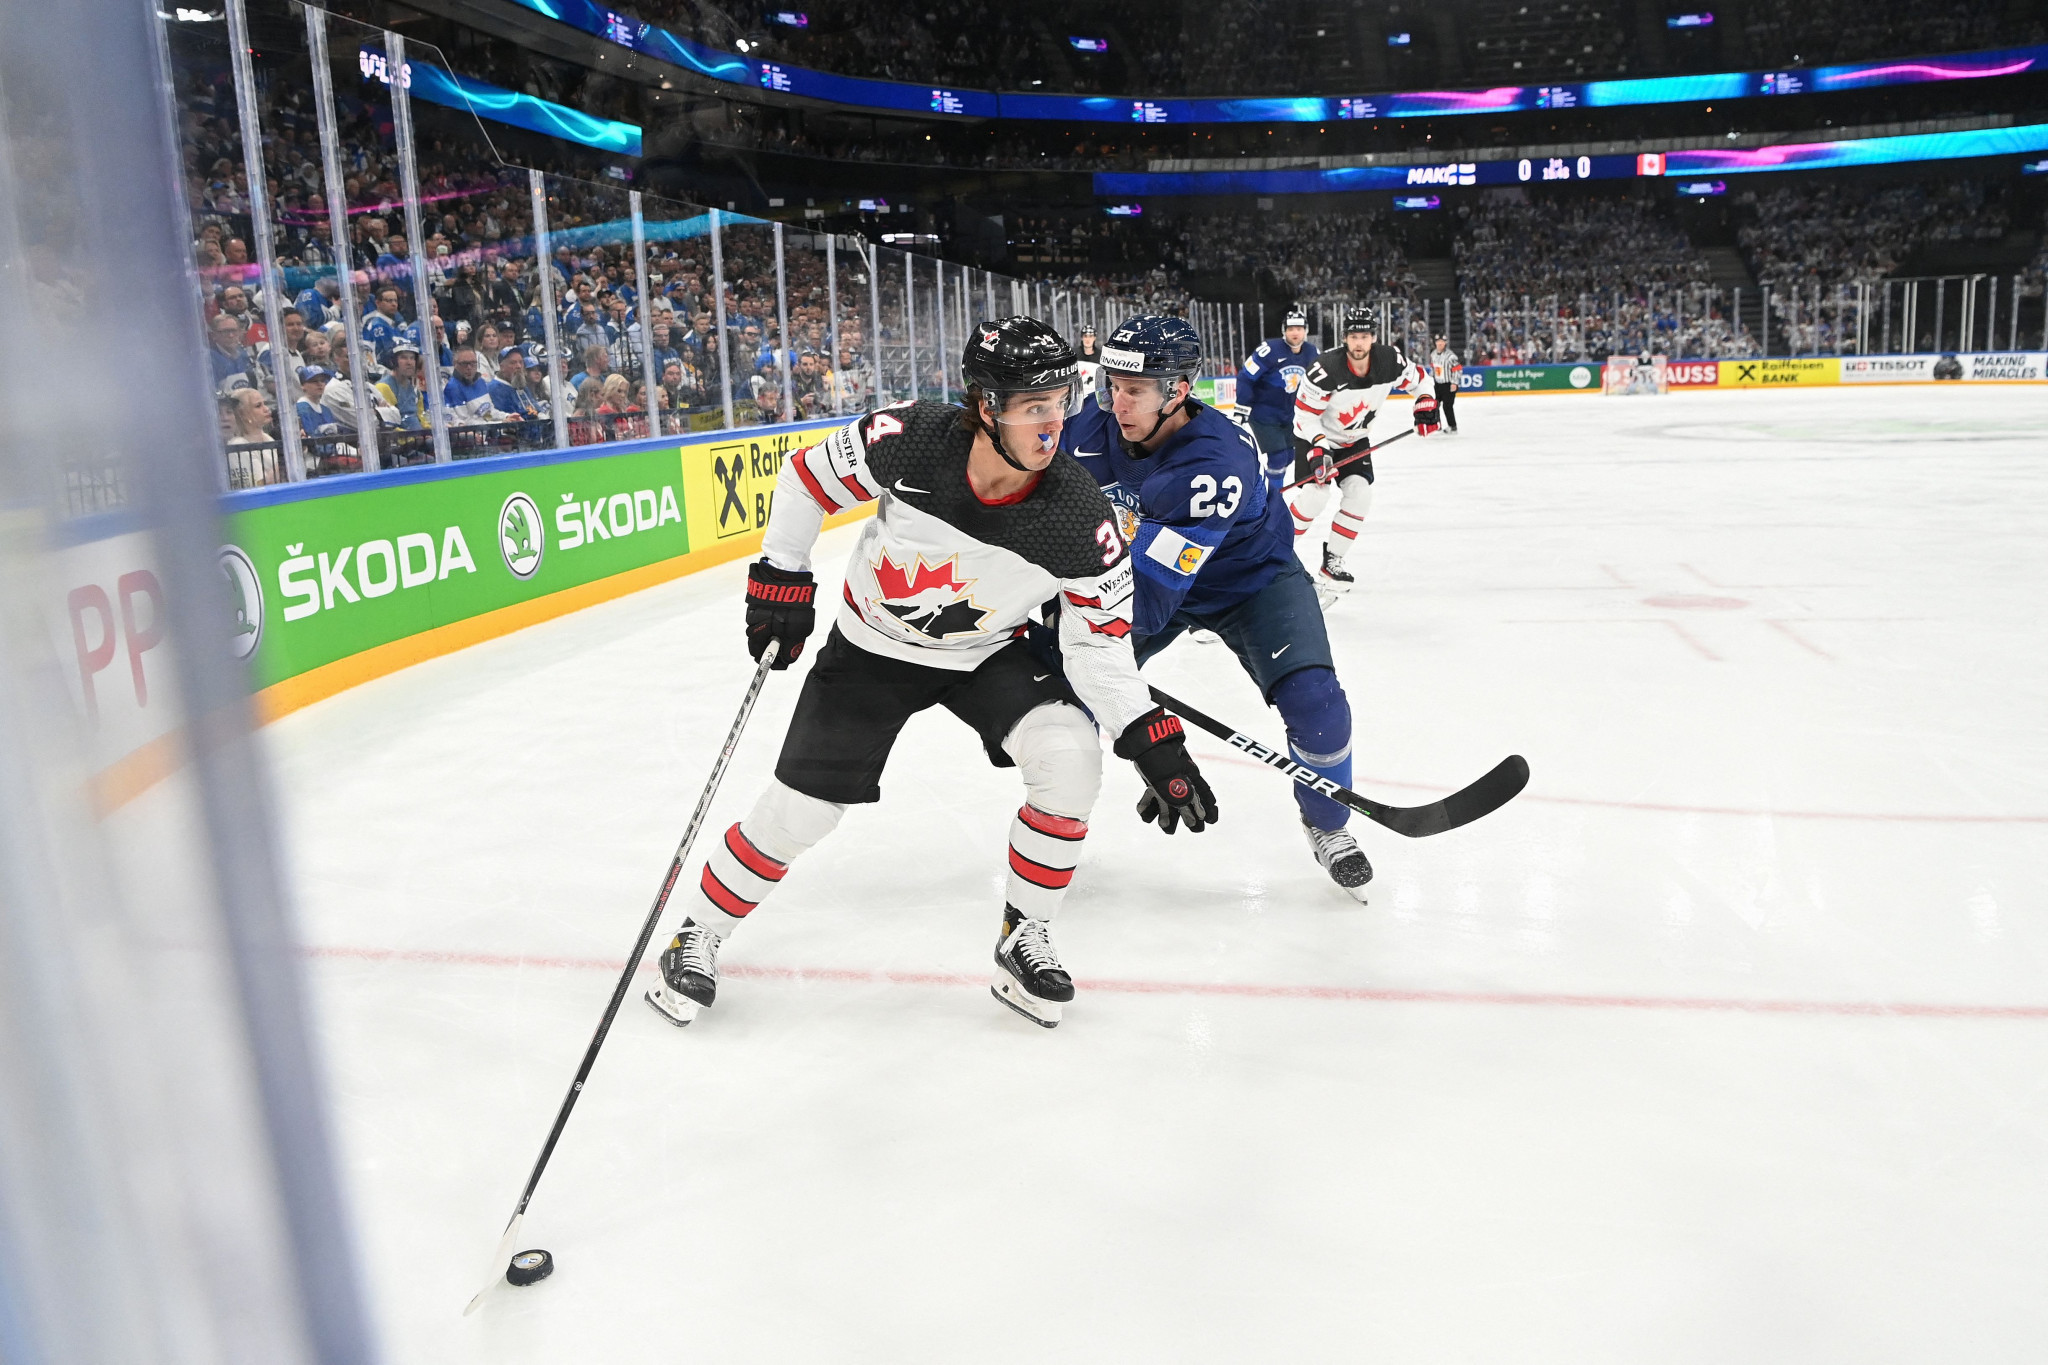 Tampere held last year's men's IIHF Ice Hockey World Championship final, won by Finland against Canada ©Getty Images